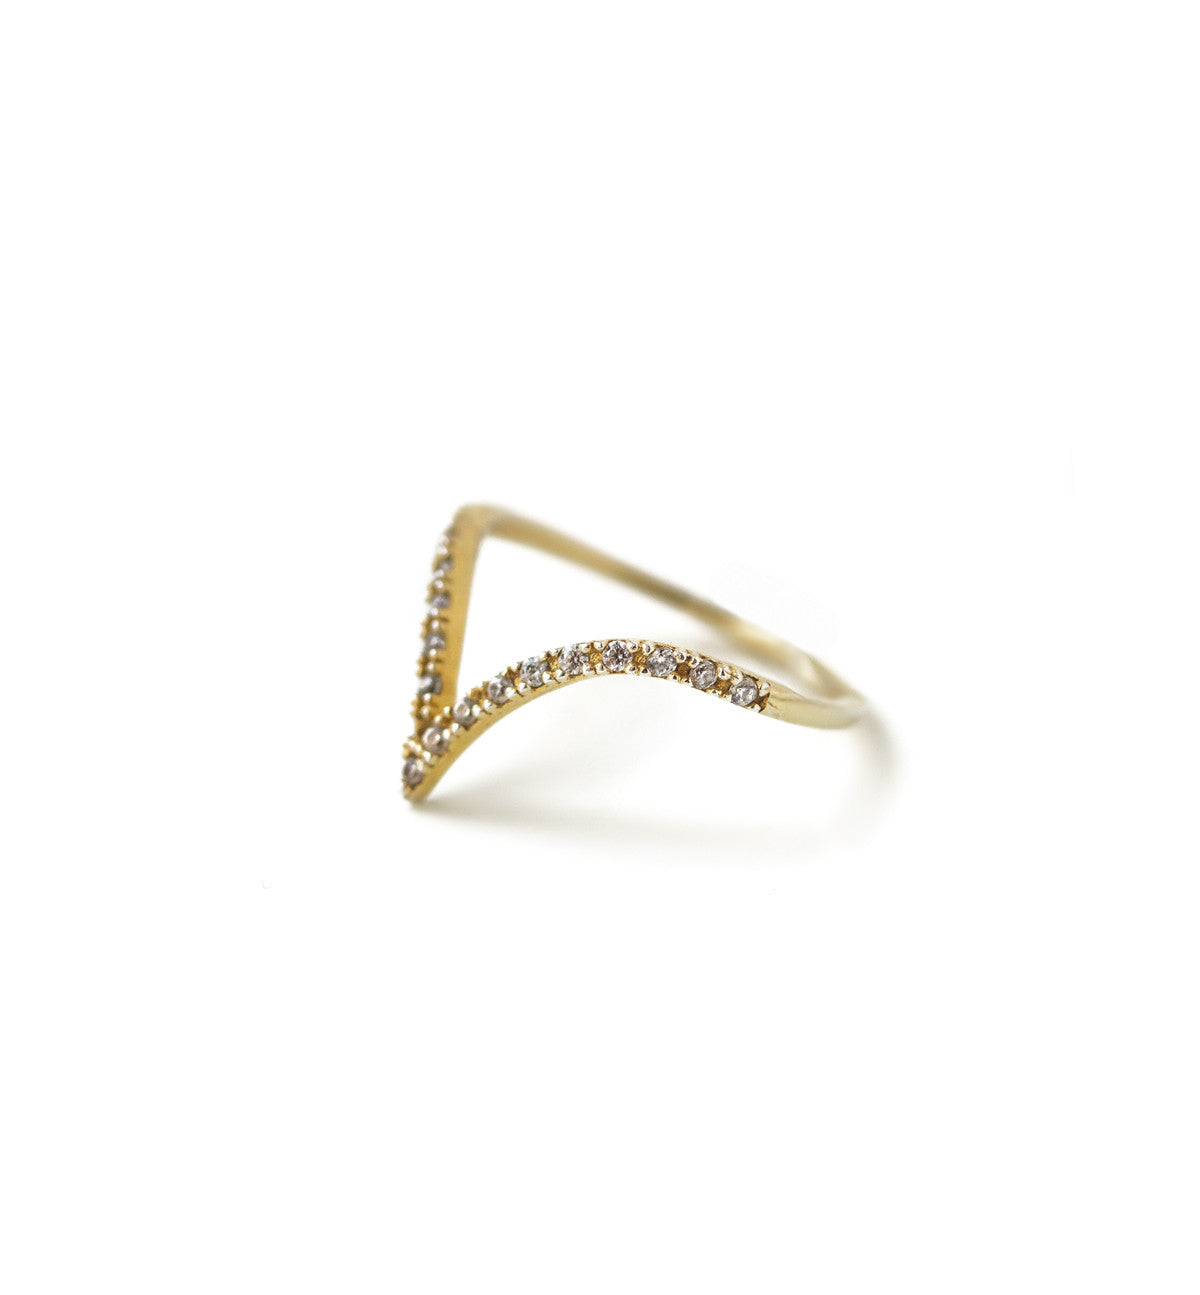 Pave Chevron Ring, Rings - AMY O. Jewelry